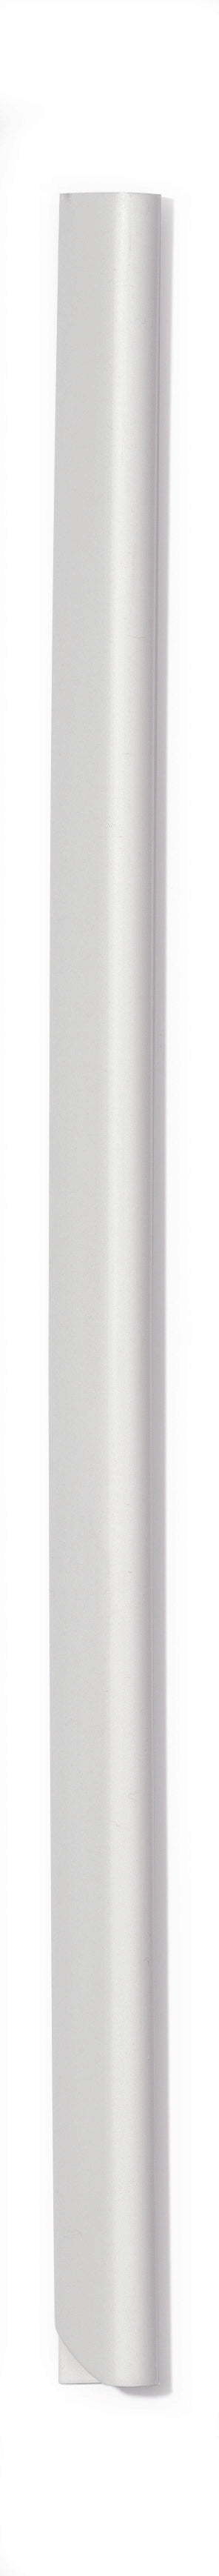 Durable Spine Bar A4 6mm White (Pack 100) 290102 - NWT FM SOLUTIONS - YOUR CATERING WHOLESALER